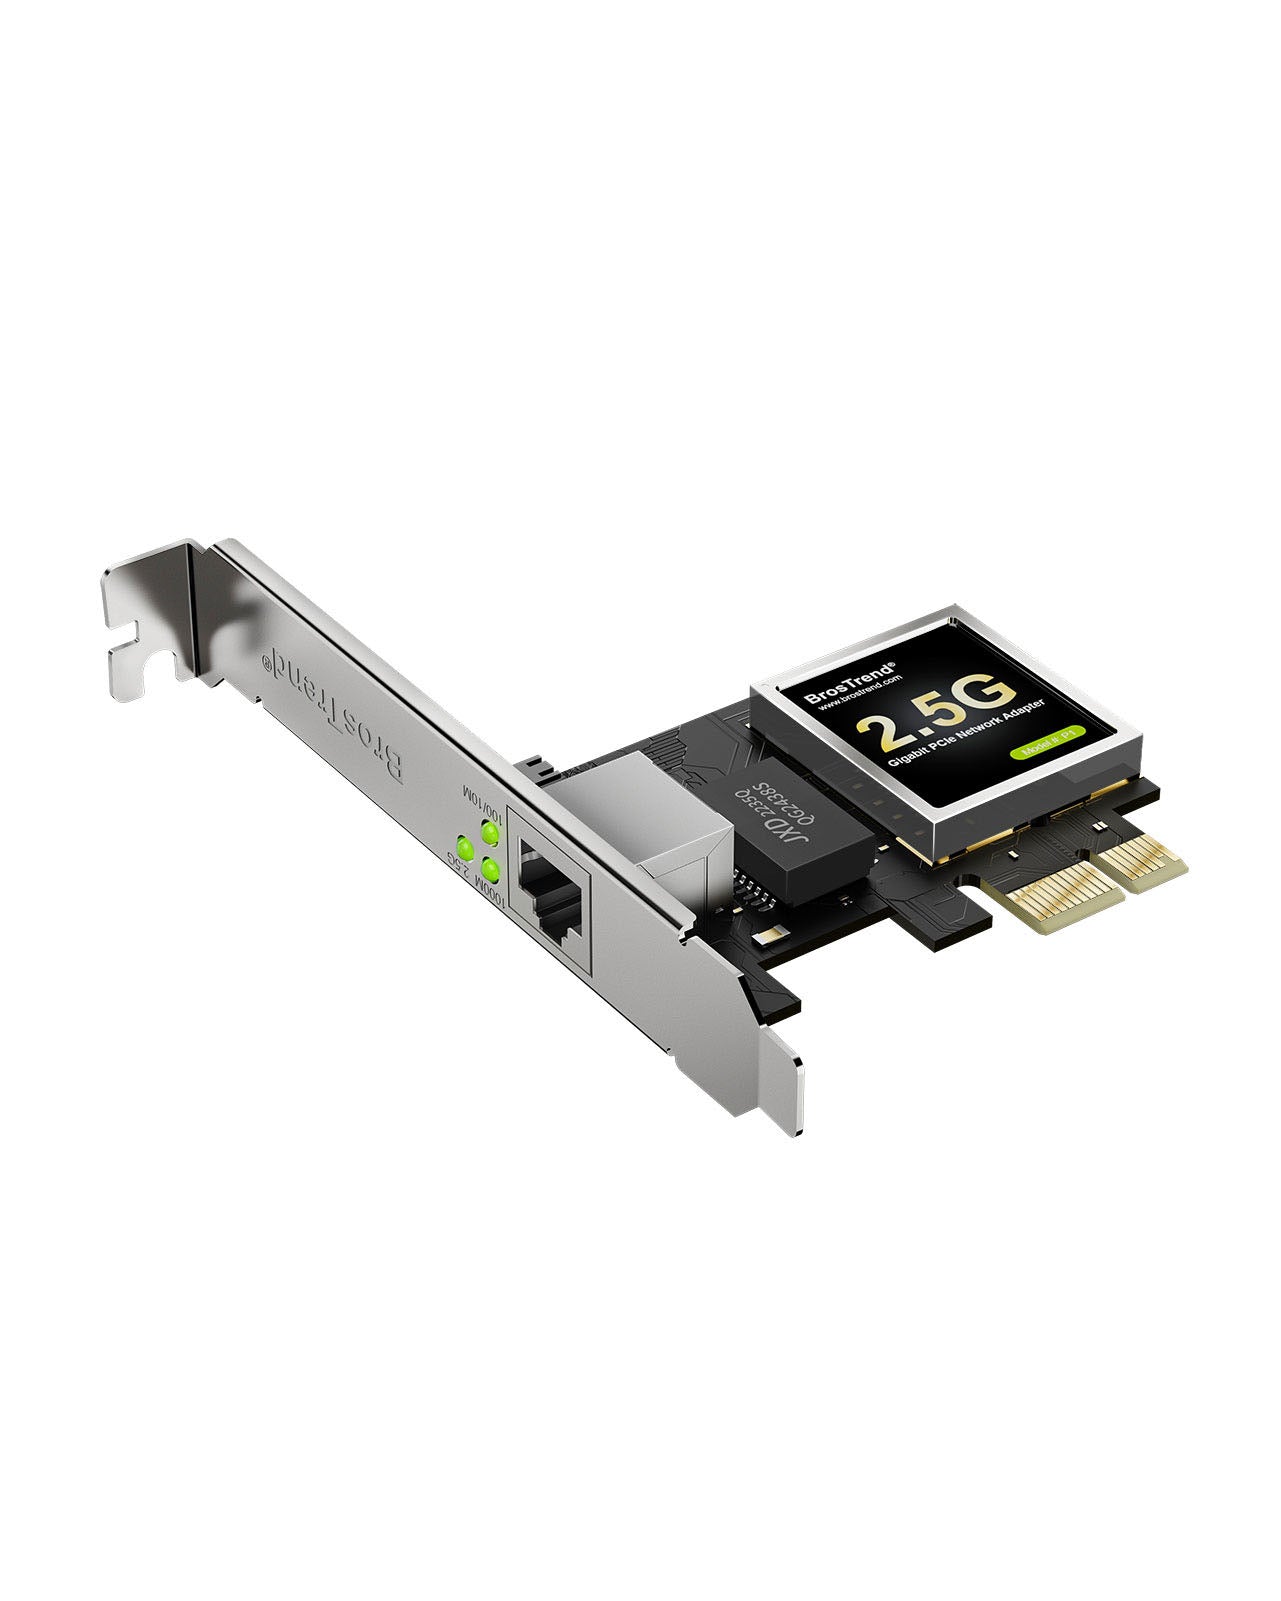 BrosTrend 2.5GB PCIe Network Card Nic PCI Express Network Adapter for Desktop PC